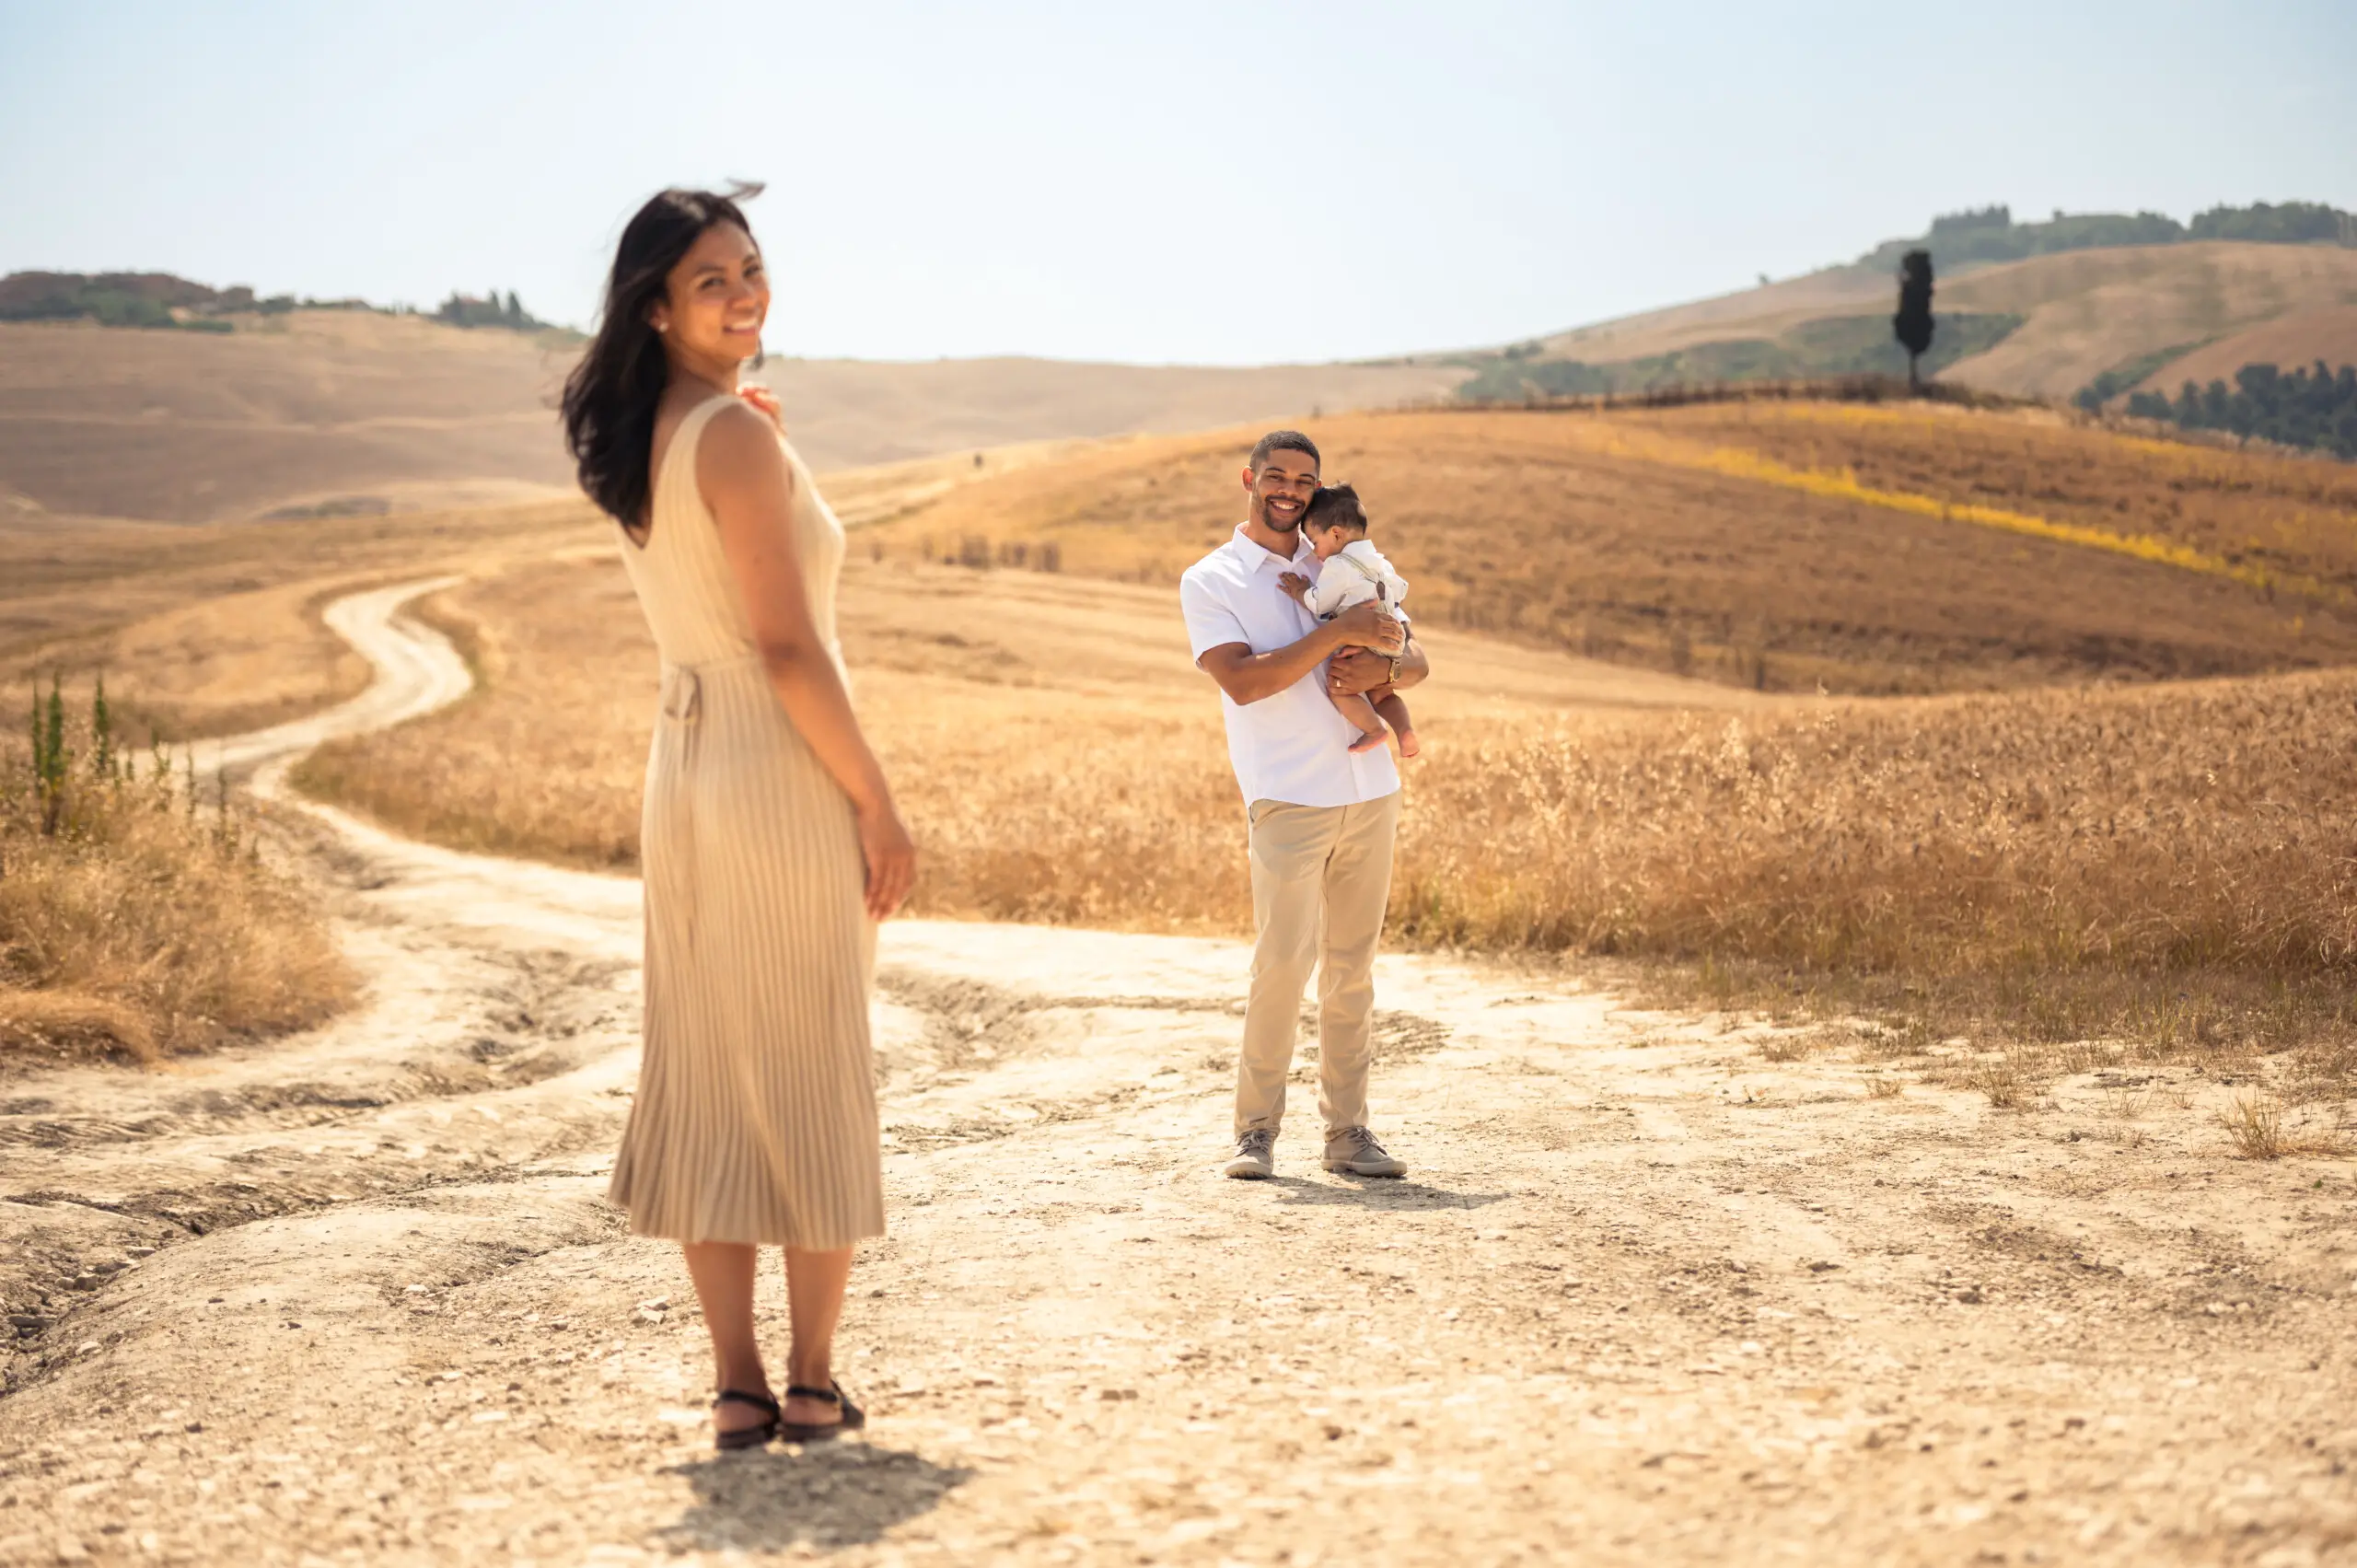 Family photoshoot by Nicolo, Localgrapher in Siena